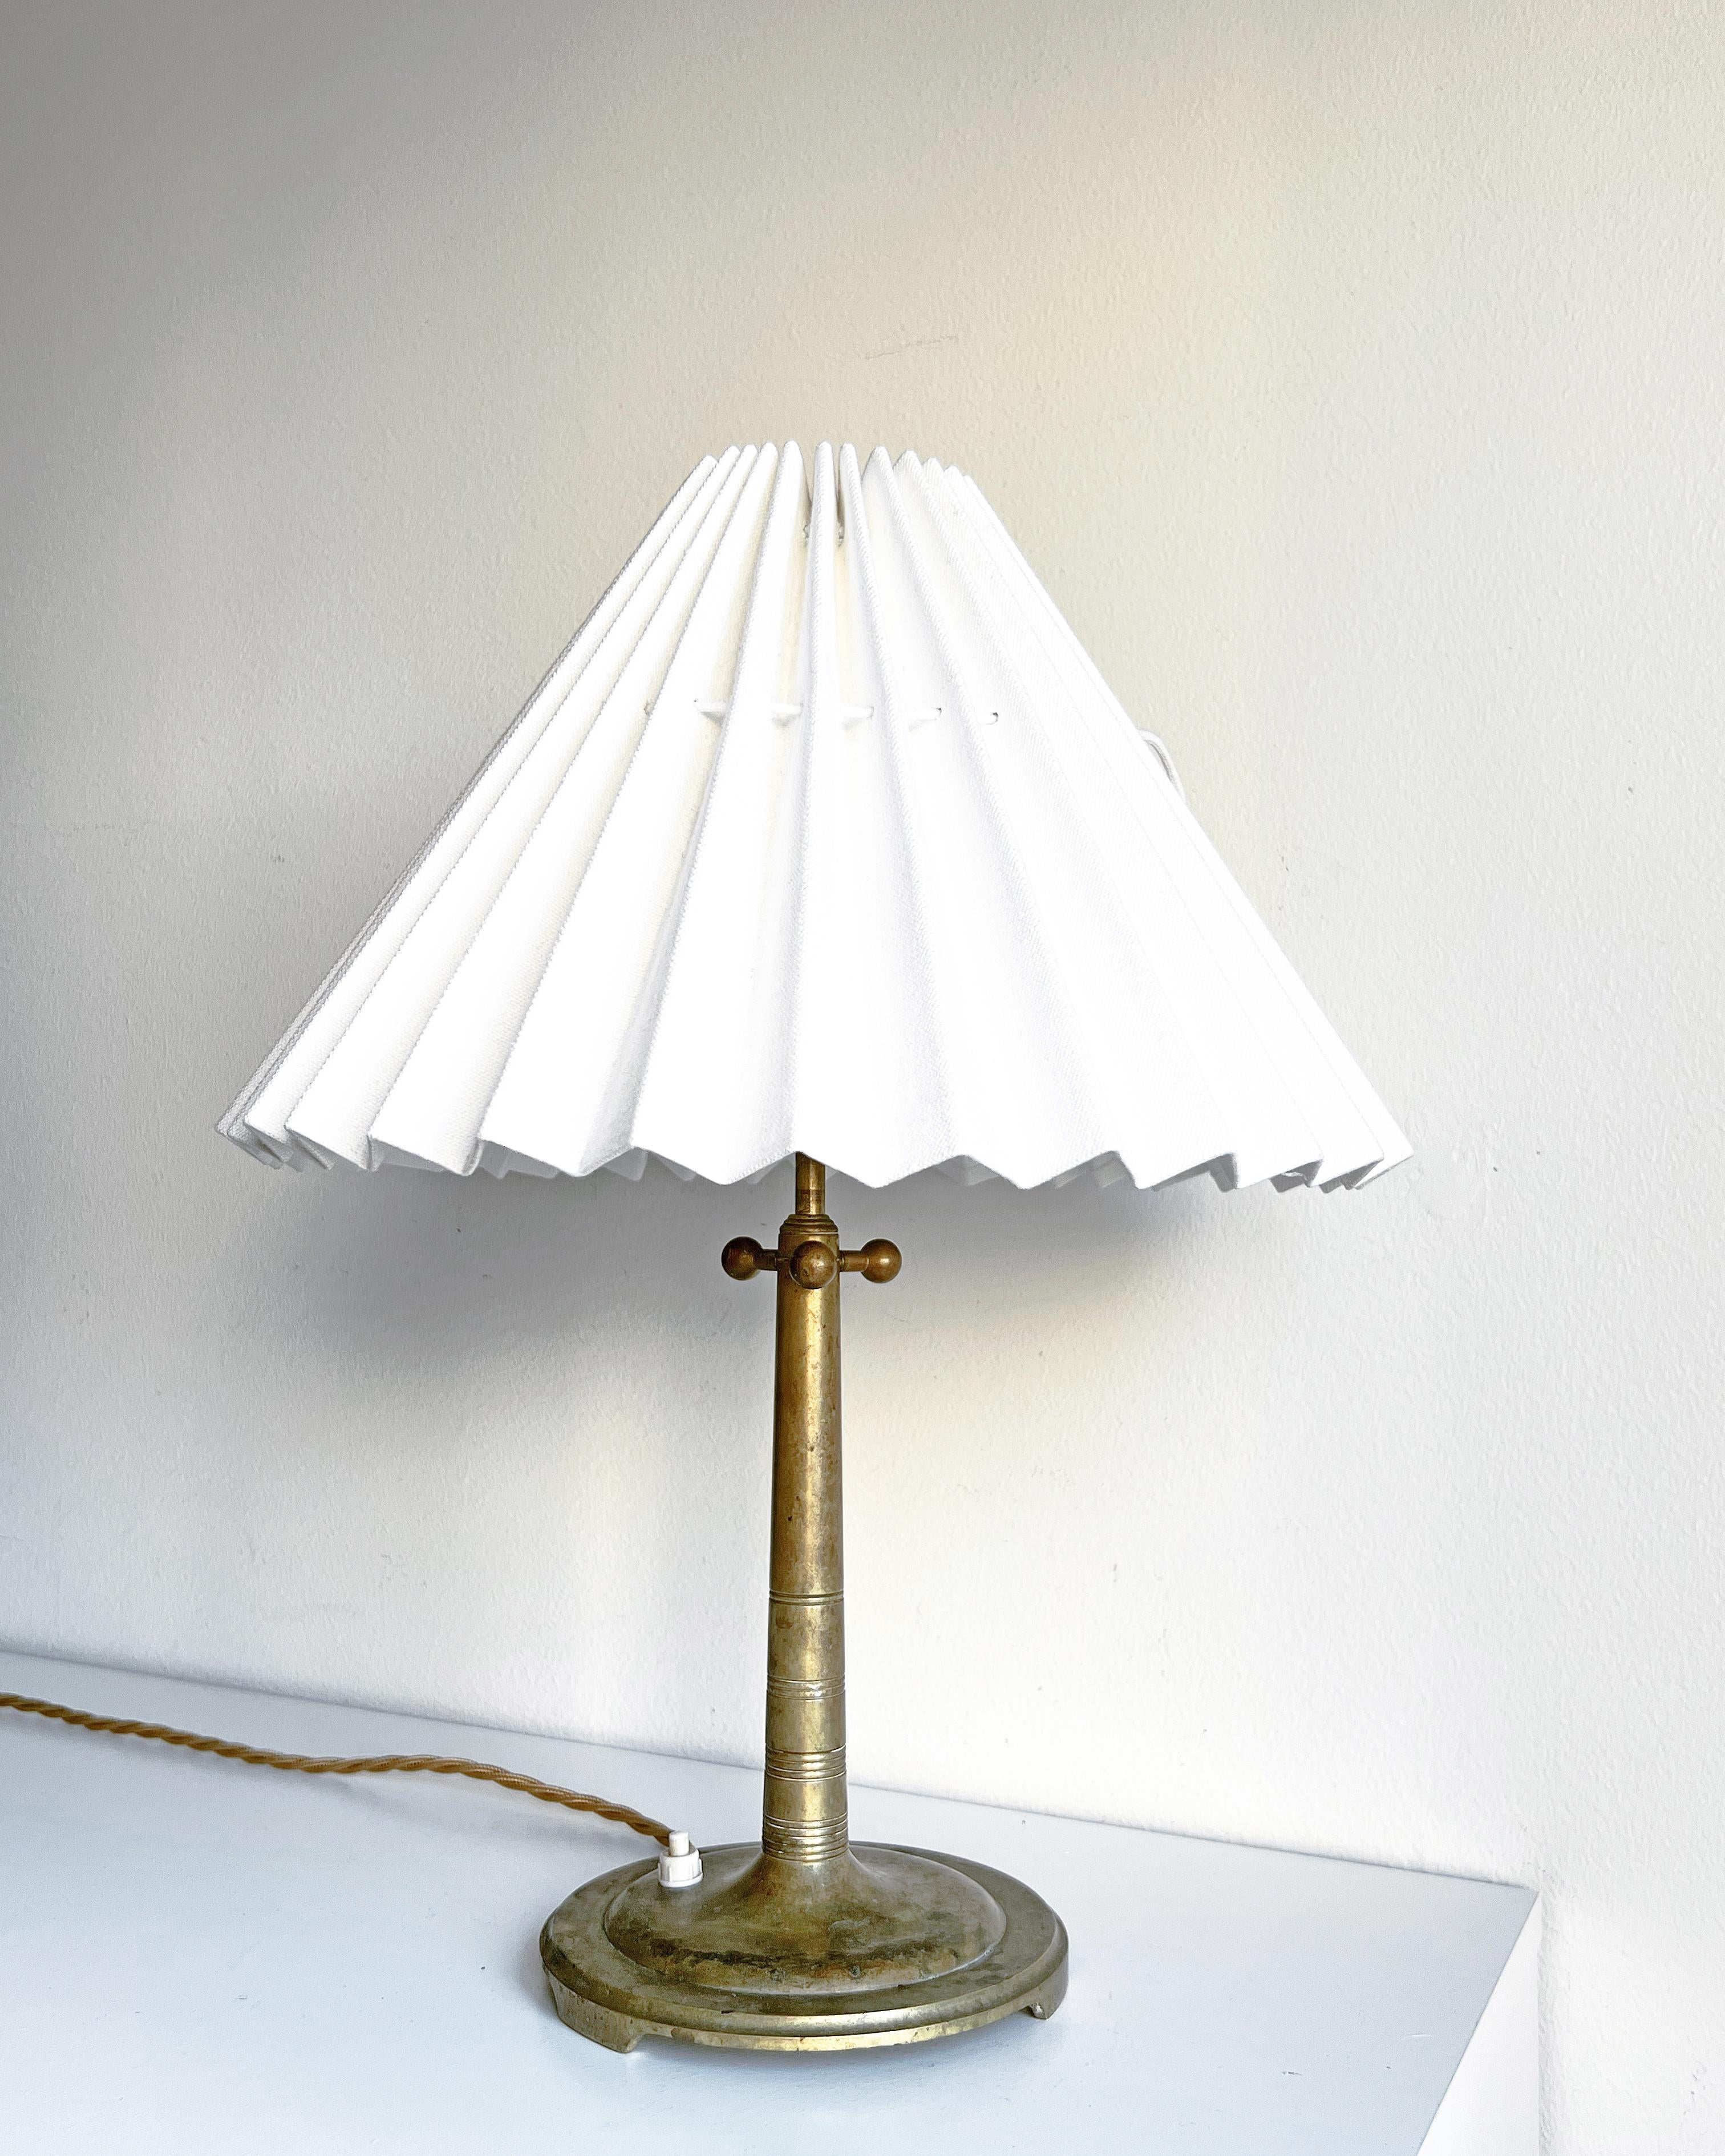 Cool and rare table lamp in brass, by unknown designer, ca 1930-40s. 
Most probably produced in Sweden.
Made in brass with adjustable height.
Measures: Height: ca 30 - 44 cm (without the shade).
Diameter: base ca 16 cm

Please note that the